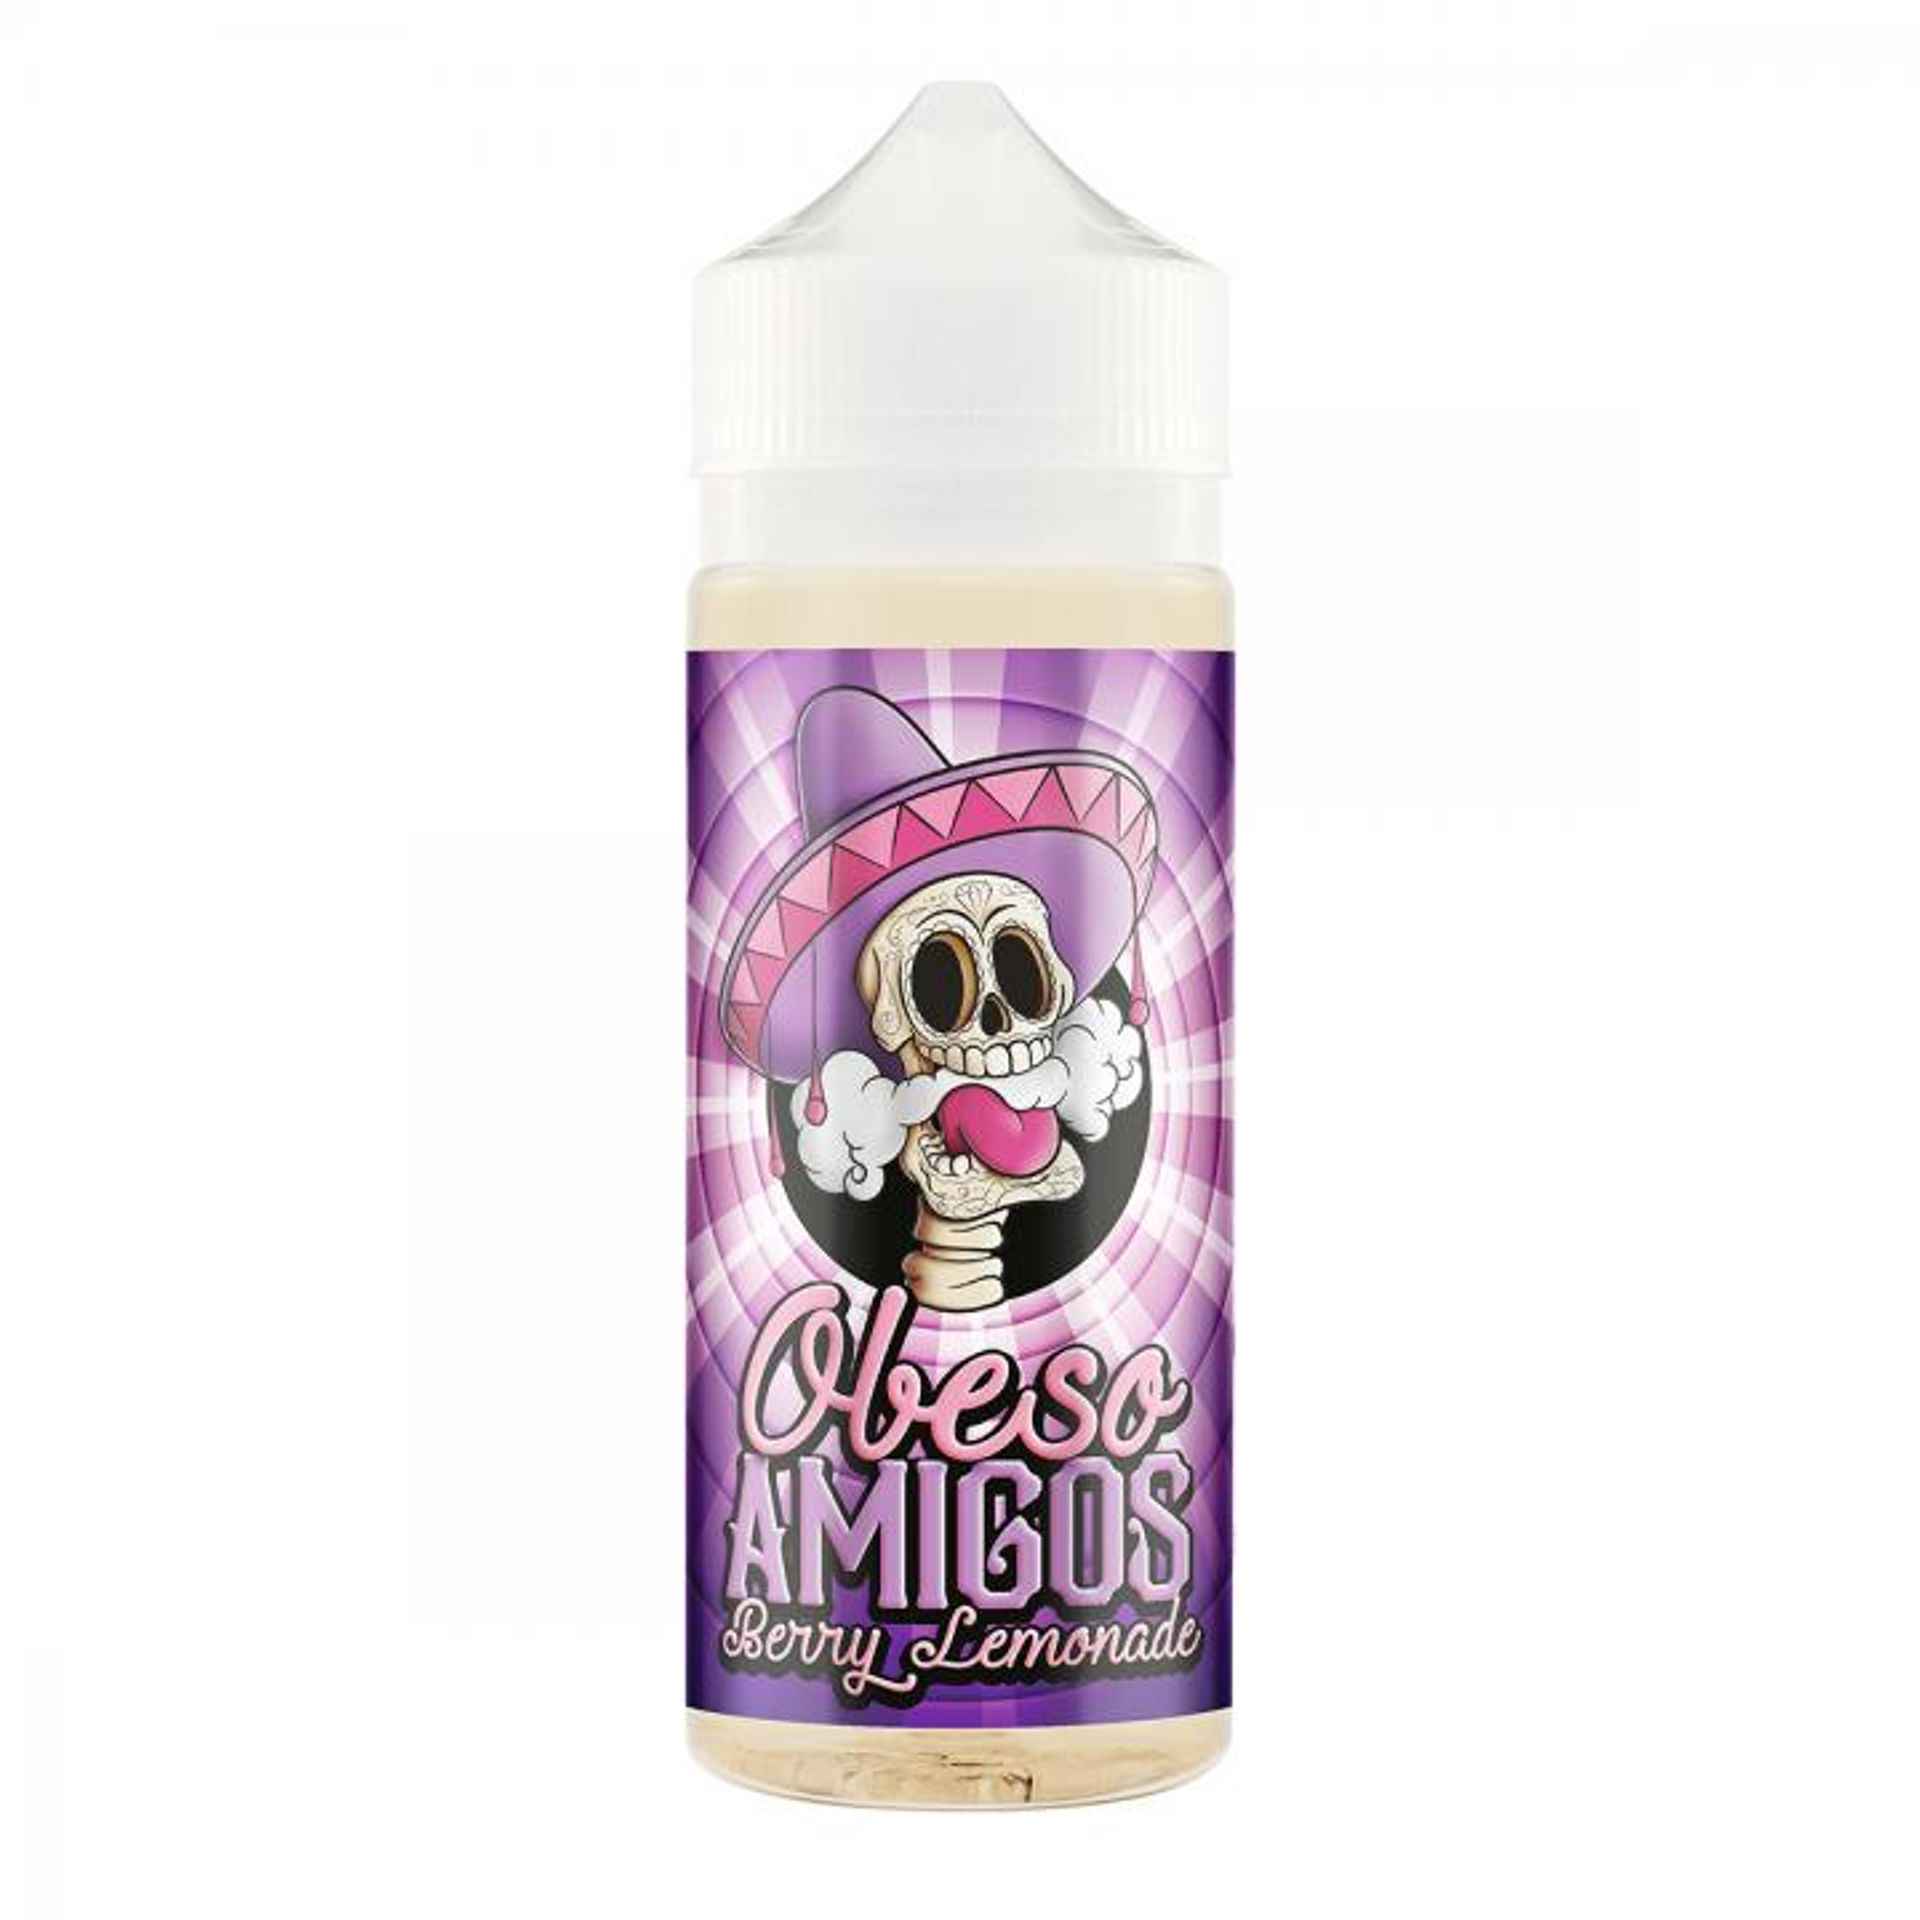 Image of Berry Lemonade by Obeso Amigos